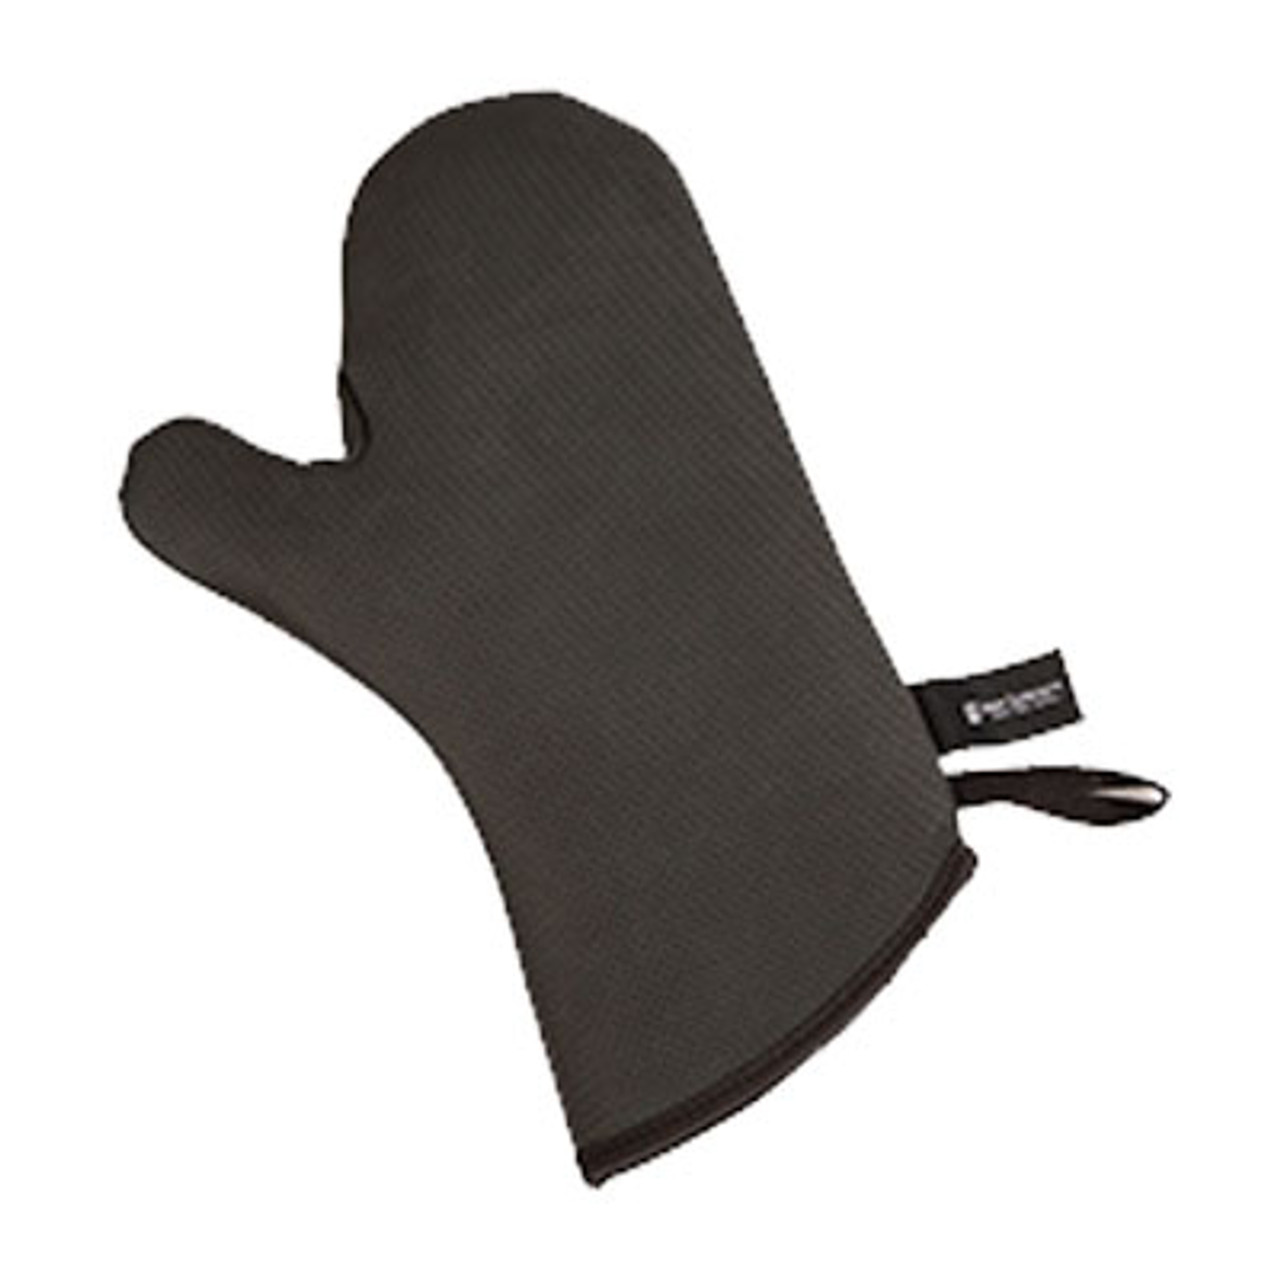 Winco Terry Cloth Oven Mitt 17 Gloves, Oven Mitts